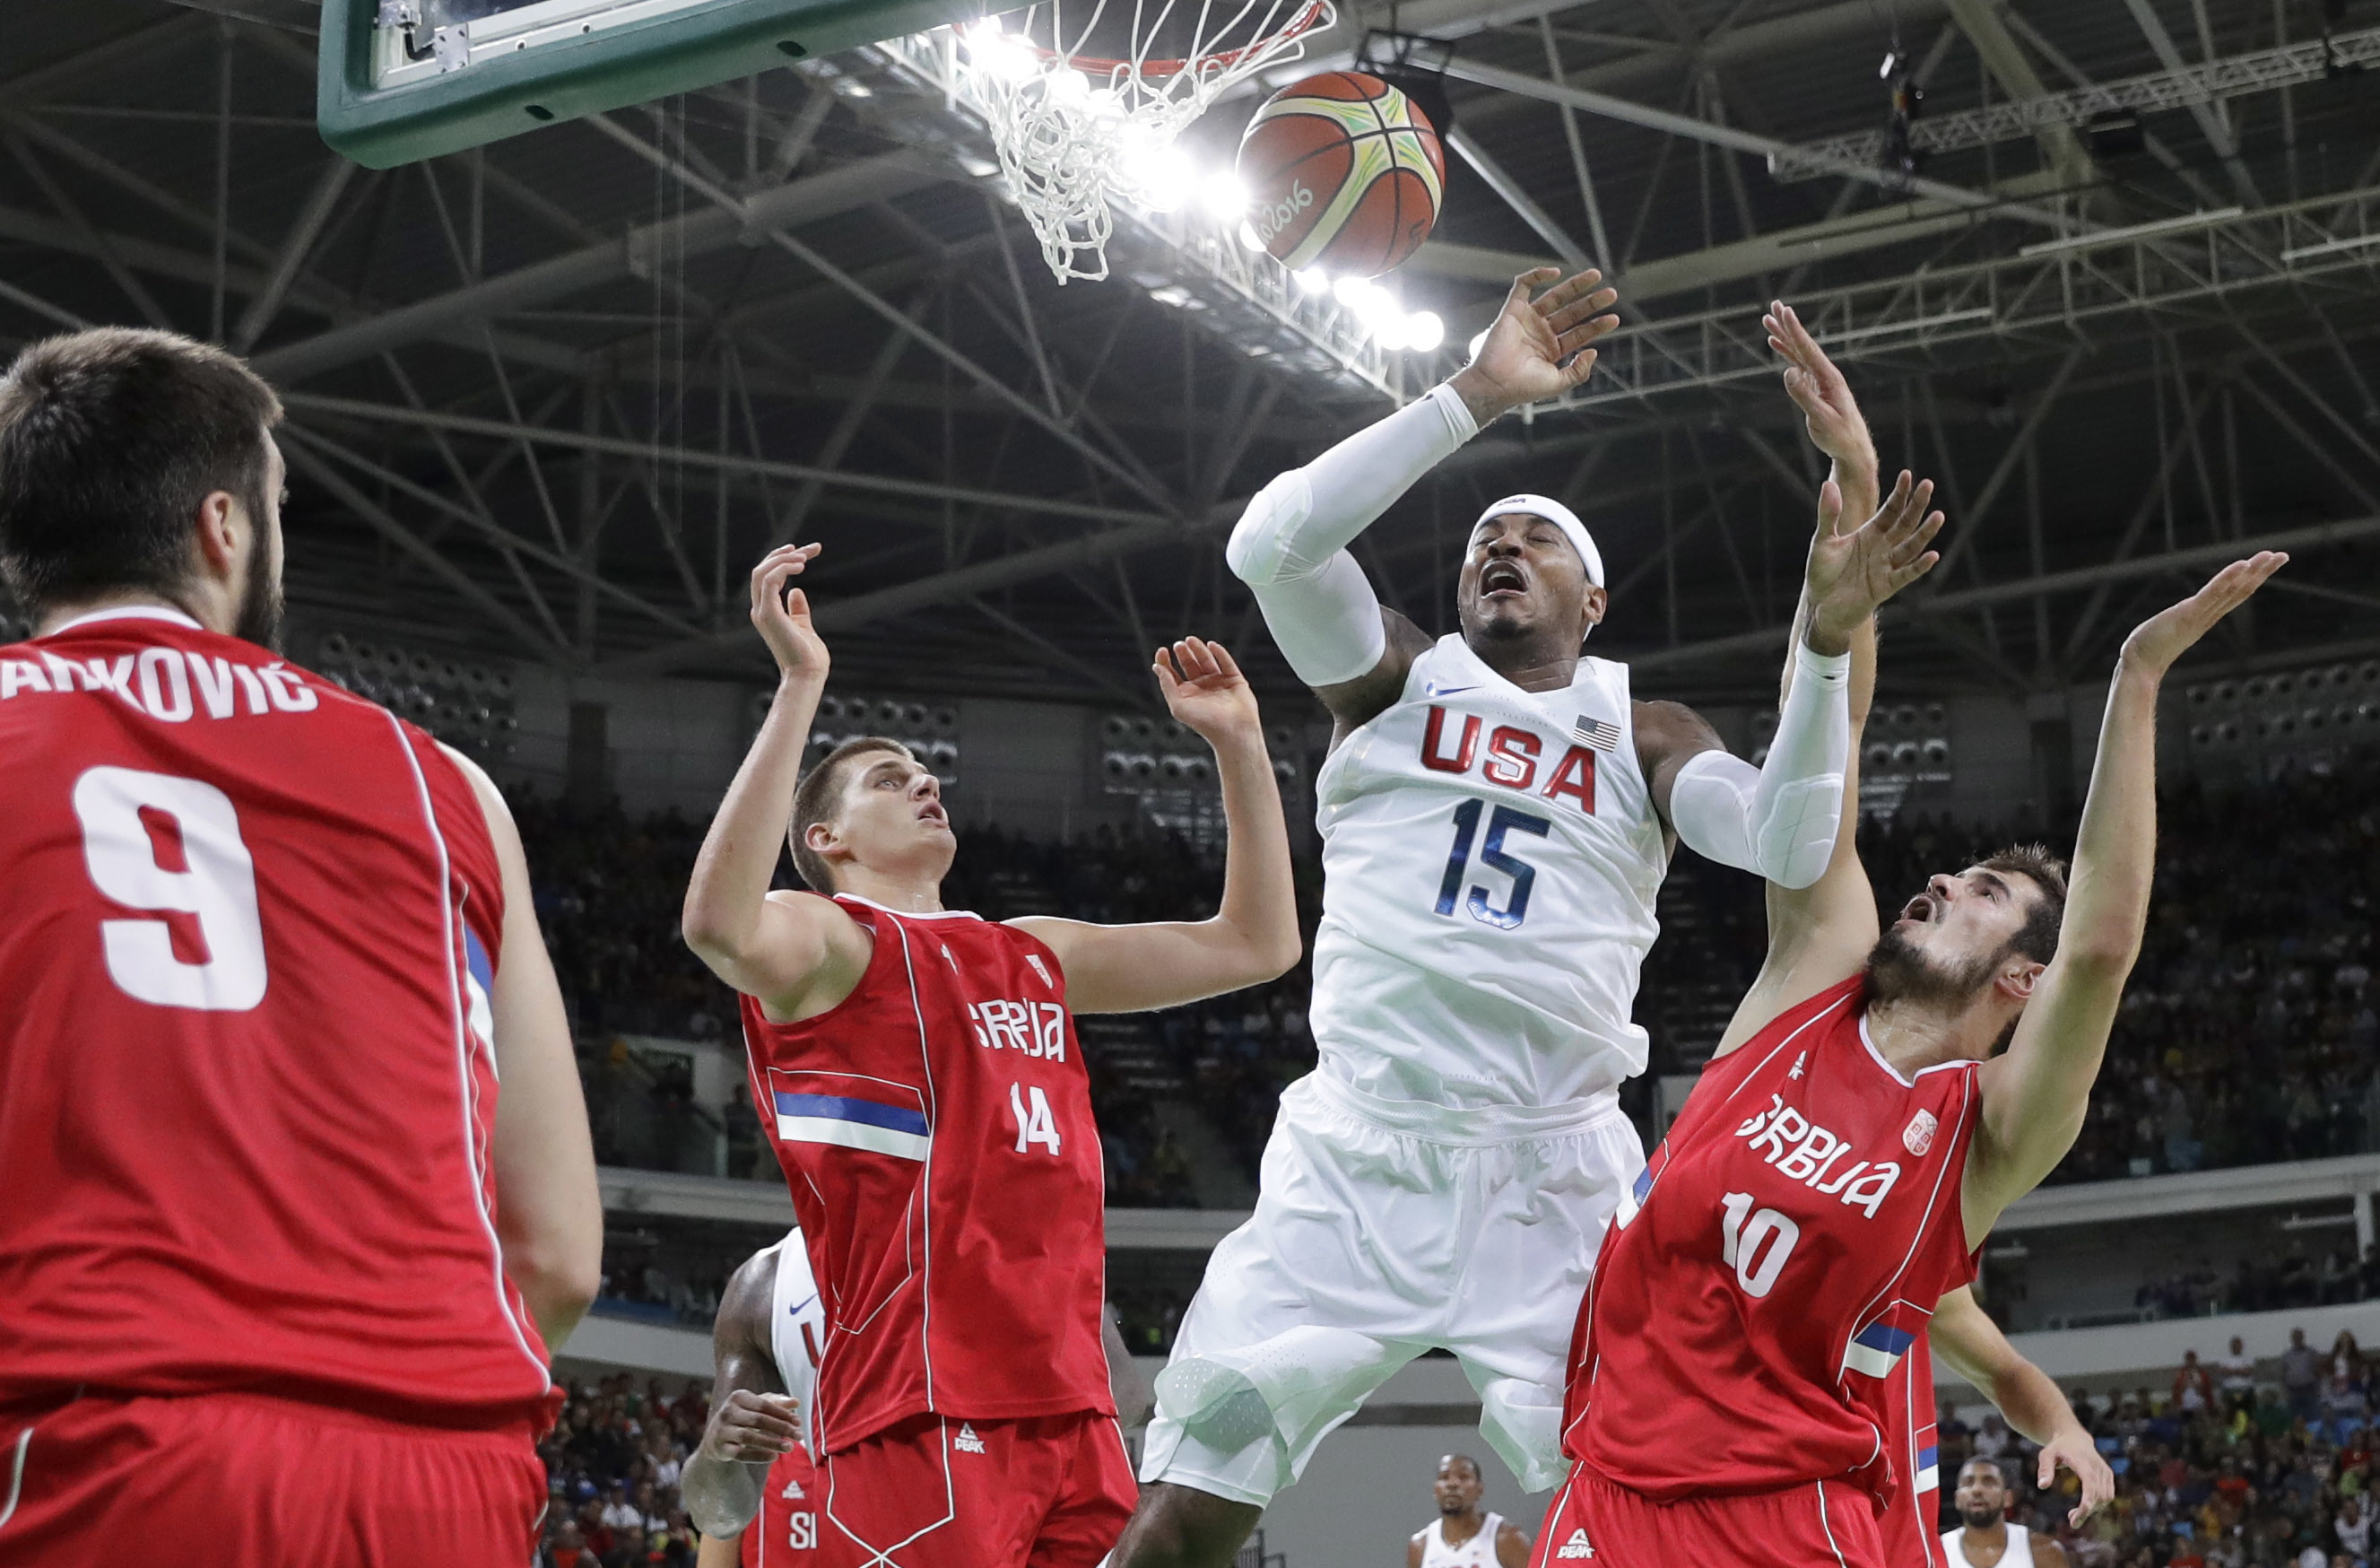 United States' Carmelo Anthony (15) fouled as he drives to the basket between Serbia's Nikola Jokic (14) and Nikola Kalinic (10) is during a men's basketball game at the 2016 Summer Olympics in Rio de Janeiro, Brazil, Friday, Aug. 12, 2016. AP